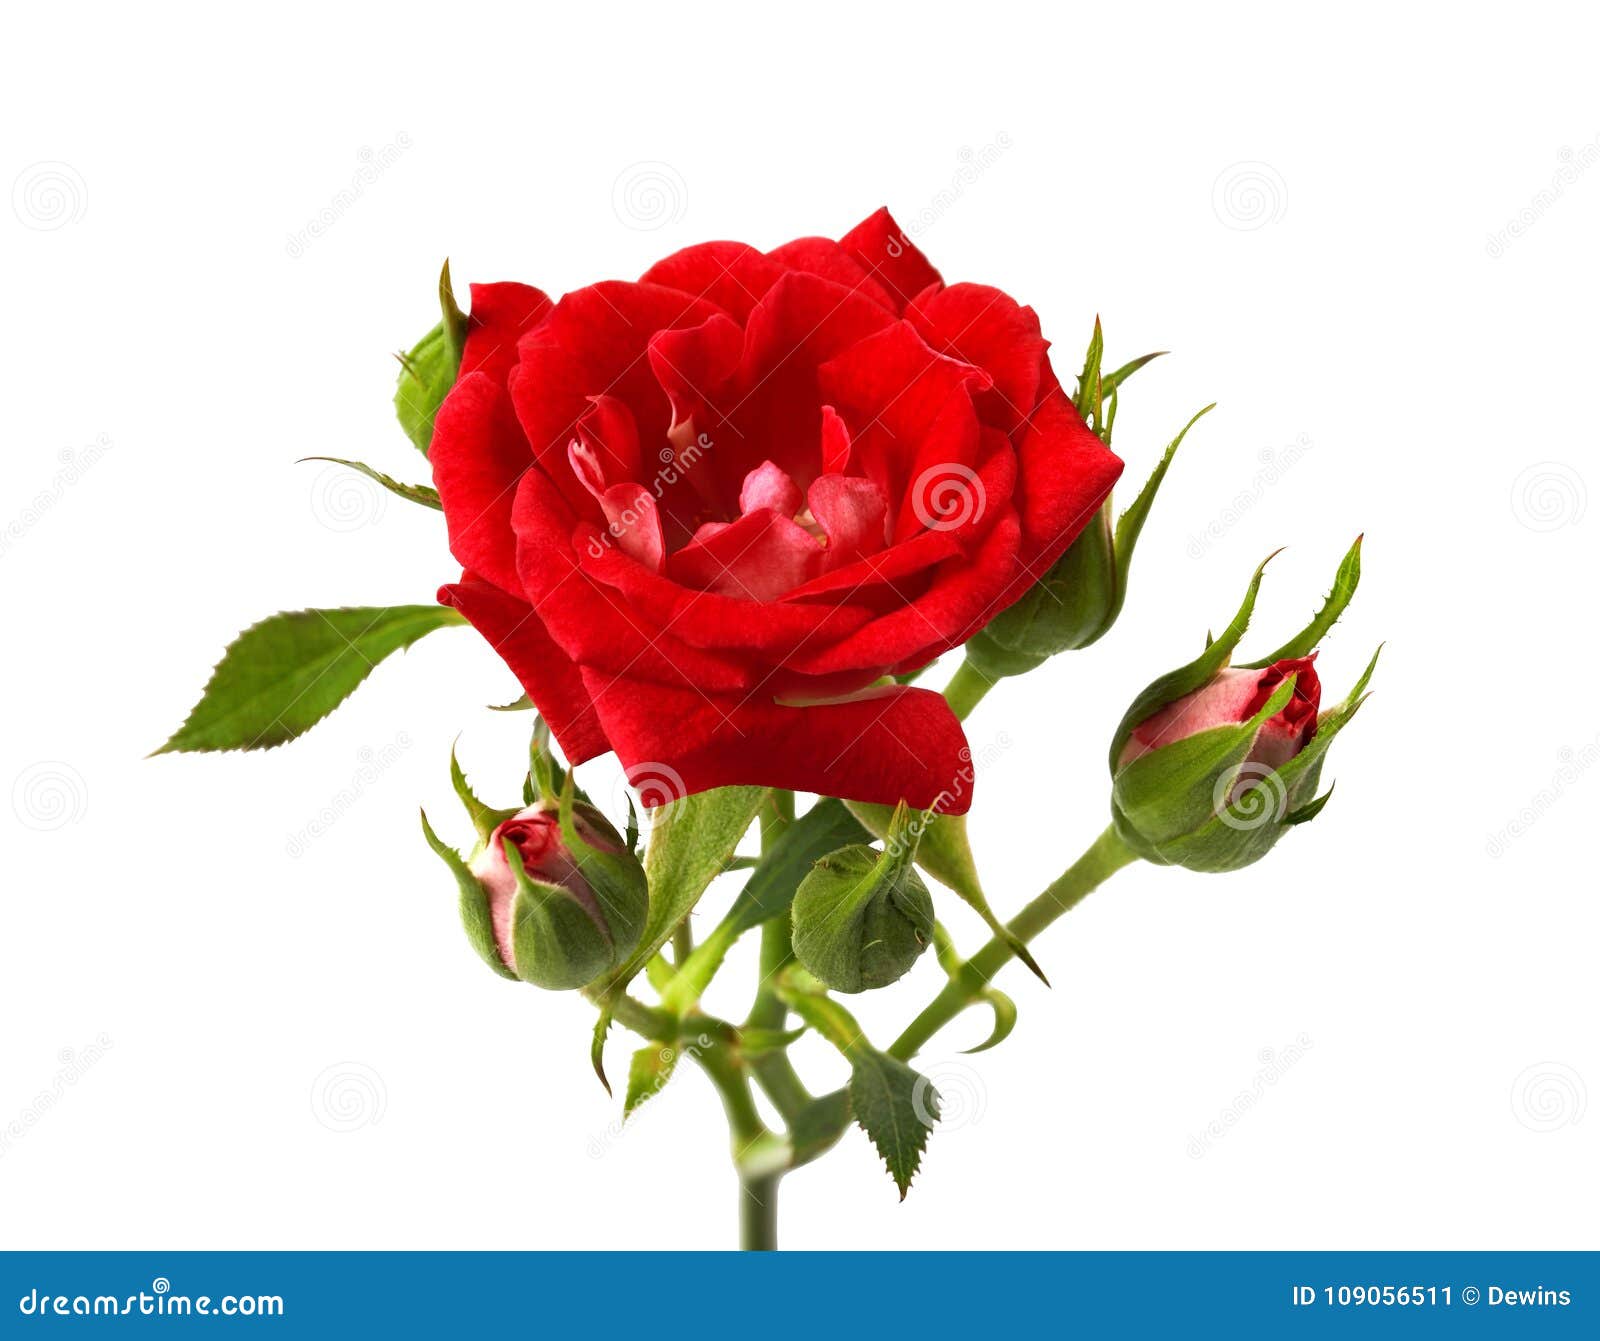 Red Rose with Leaves and Rose Buds, Blooming Rose Isolated on White ...